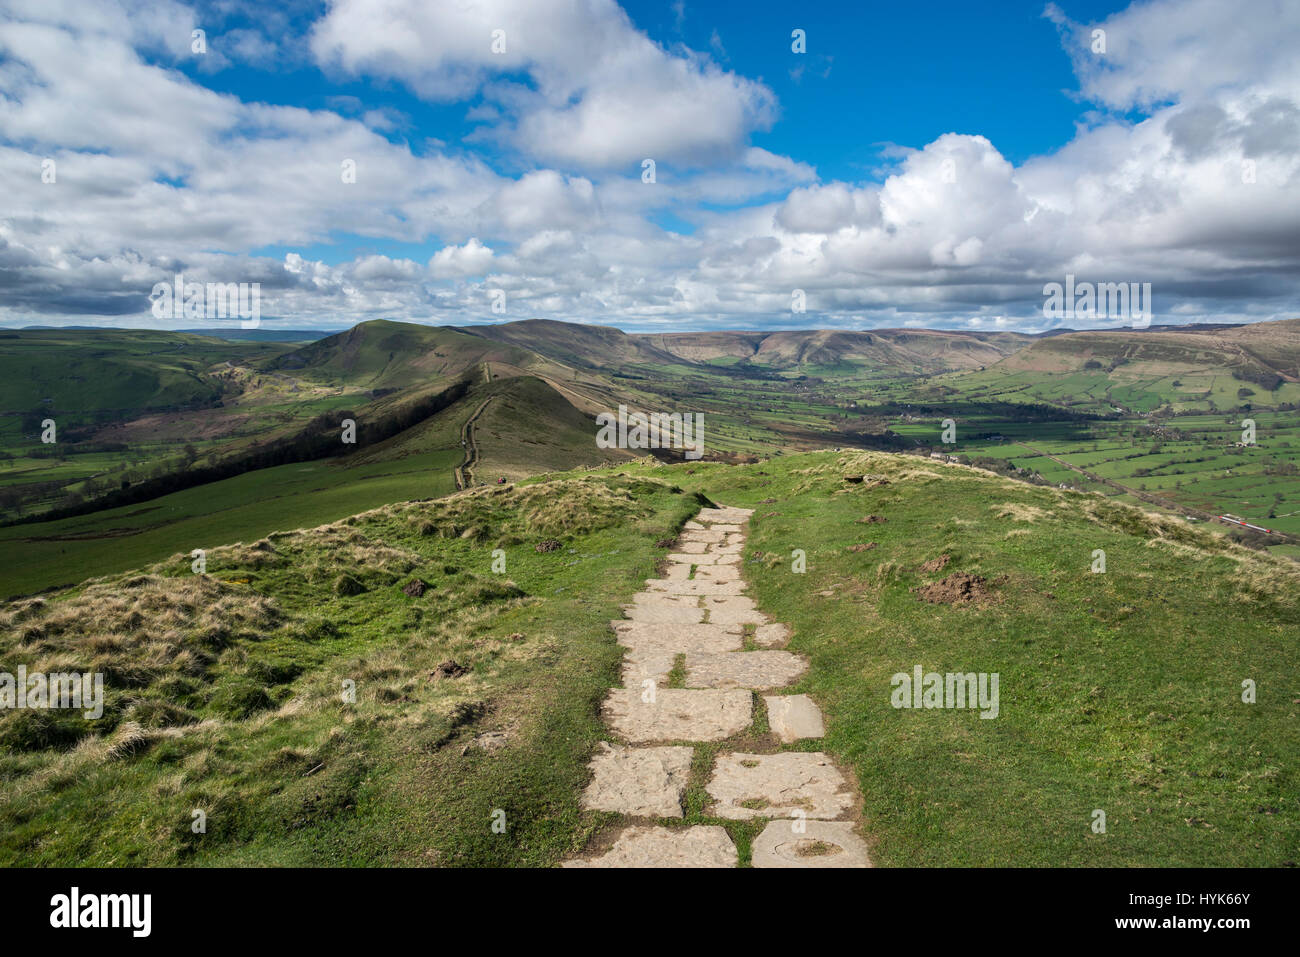 Paved path on Lose Hill, view along the great ridge to Mam Tor in the Peak District national park, England. Stock Photo